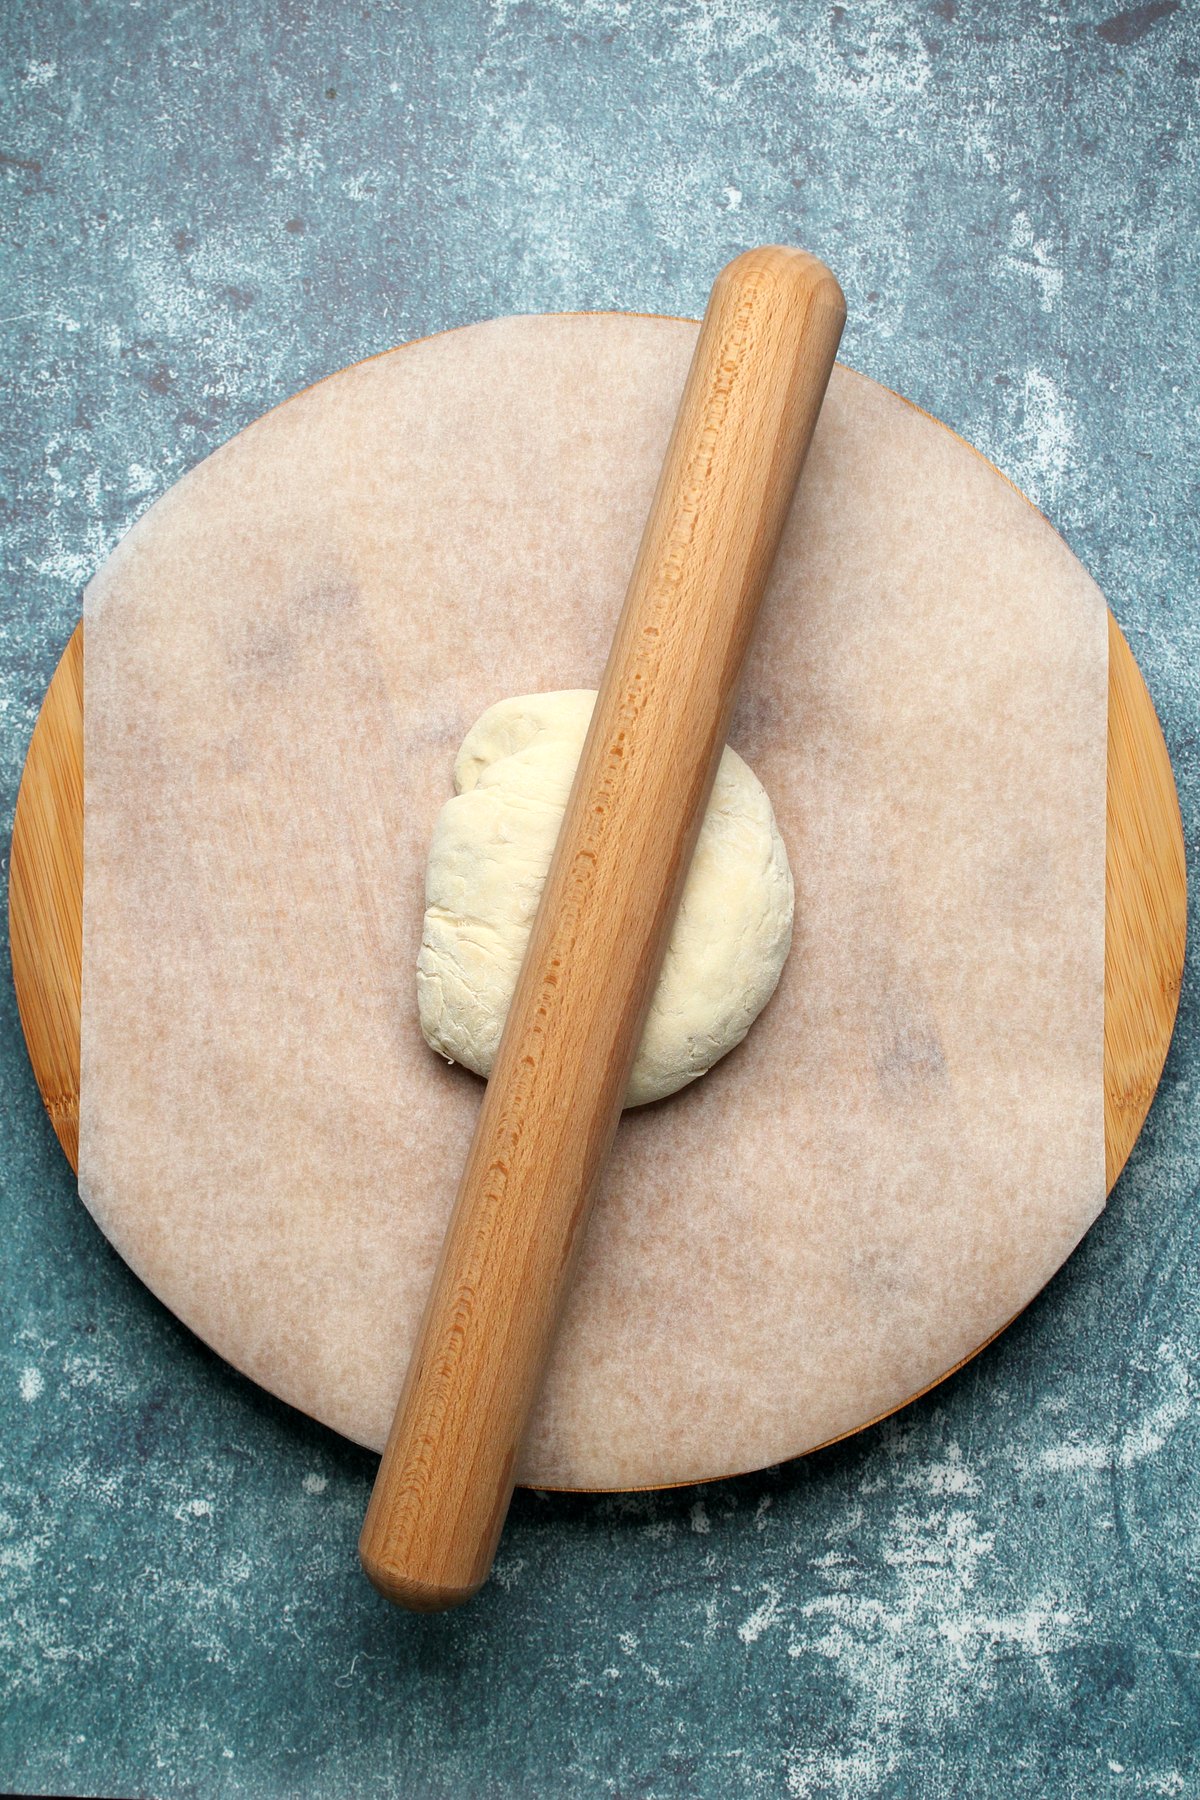 Ball of dough on parchment paper with a rolling pin.